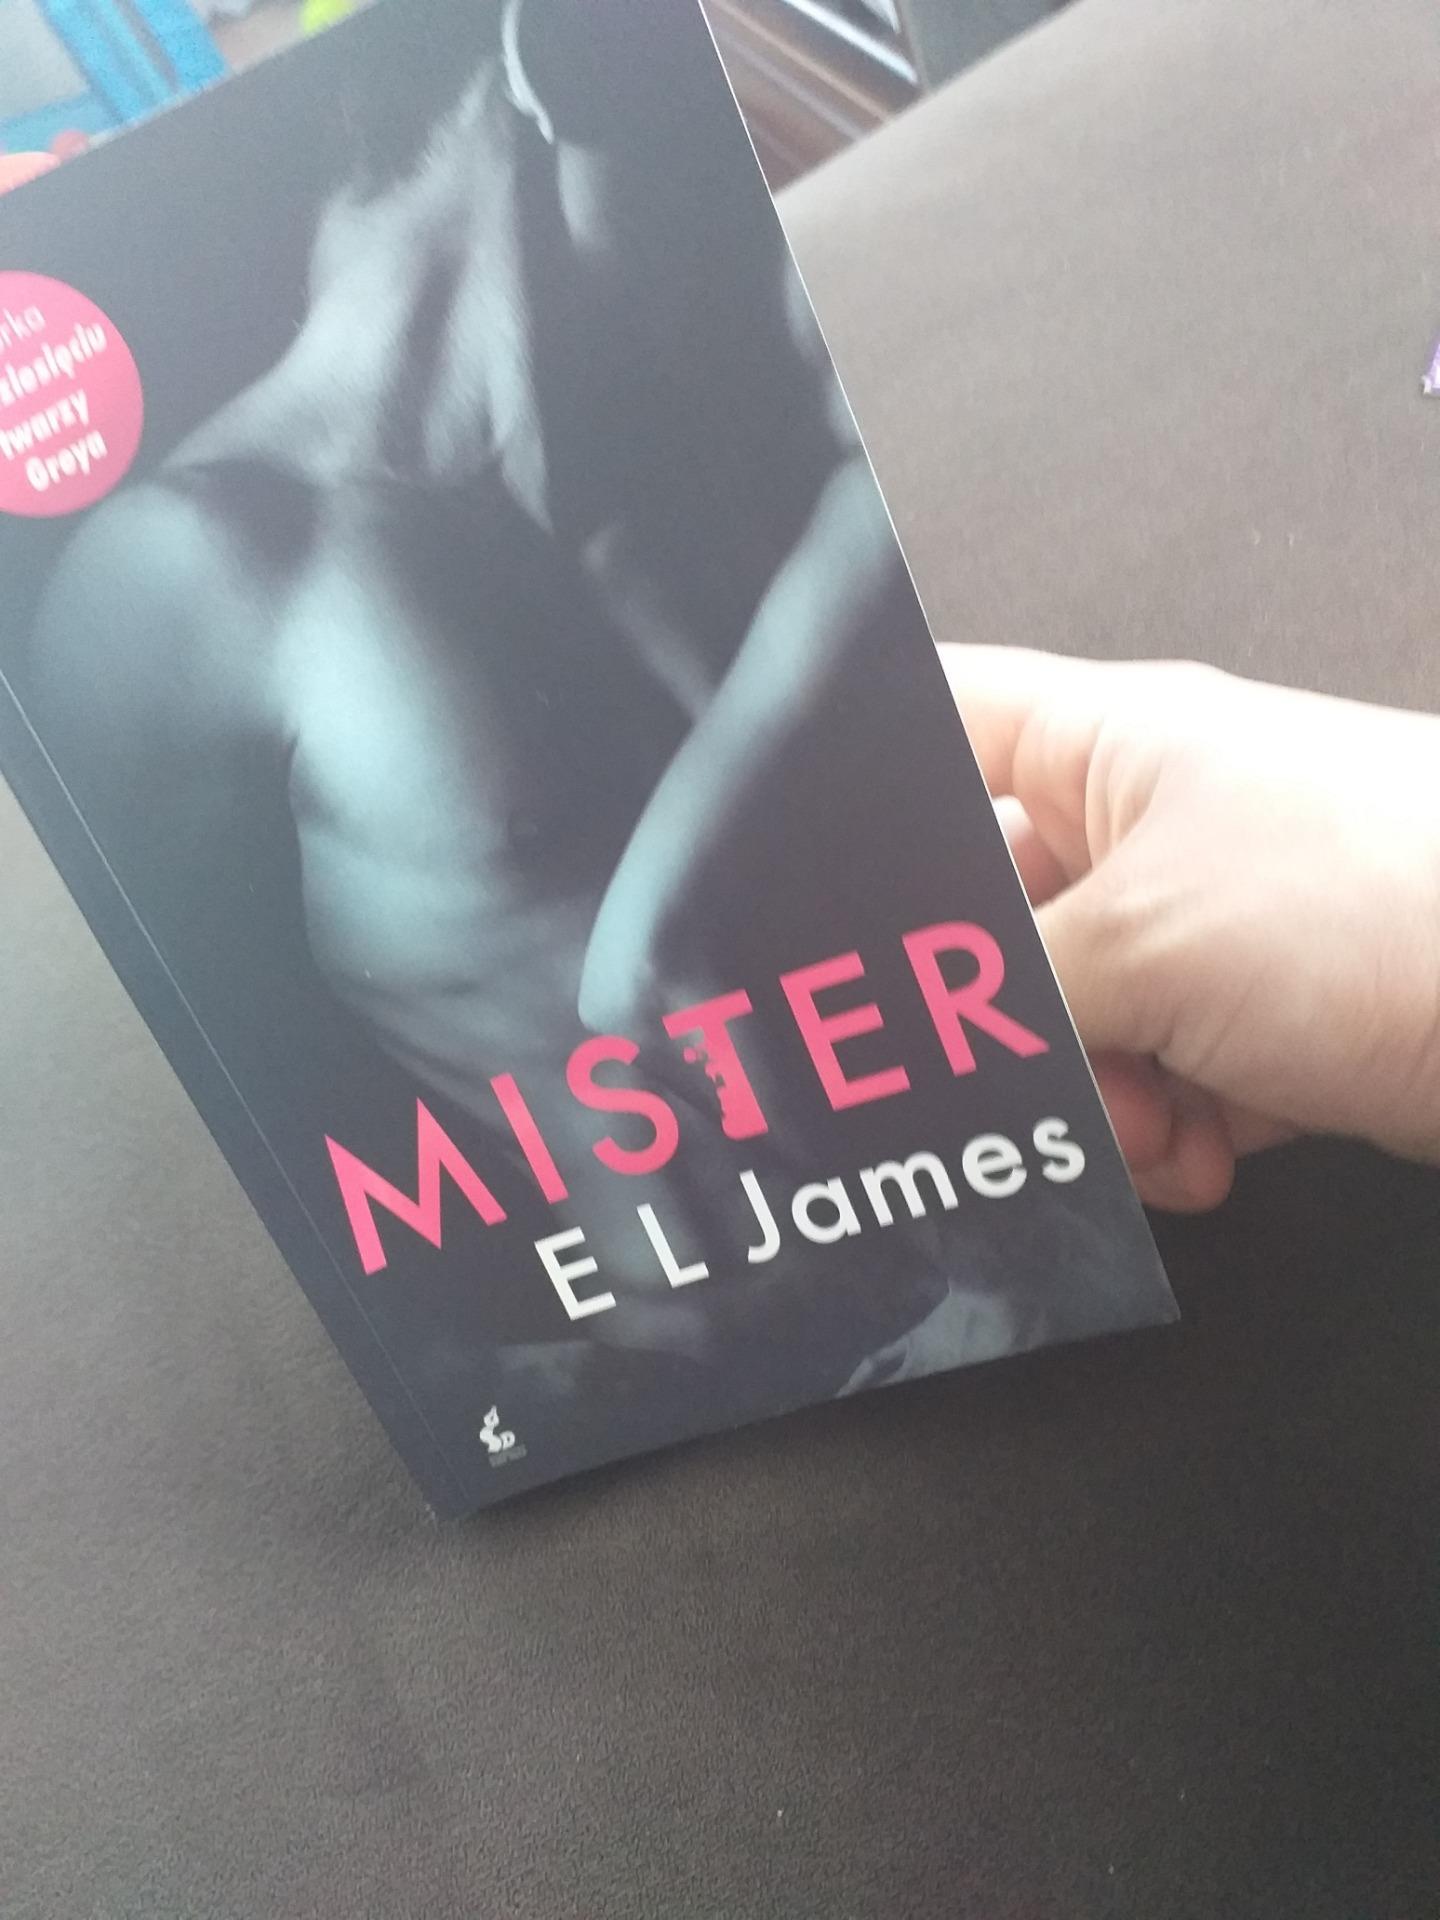 the mister james